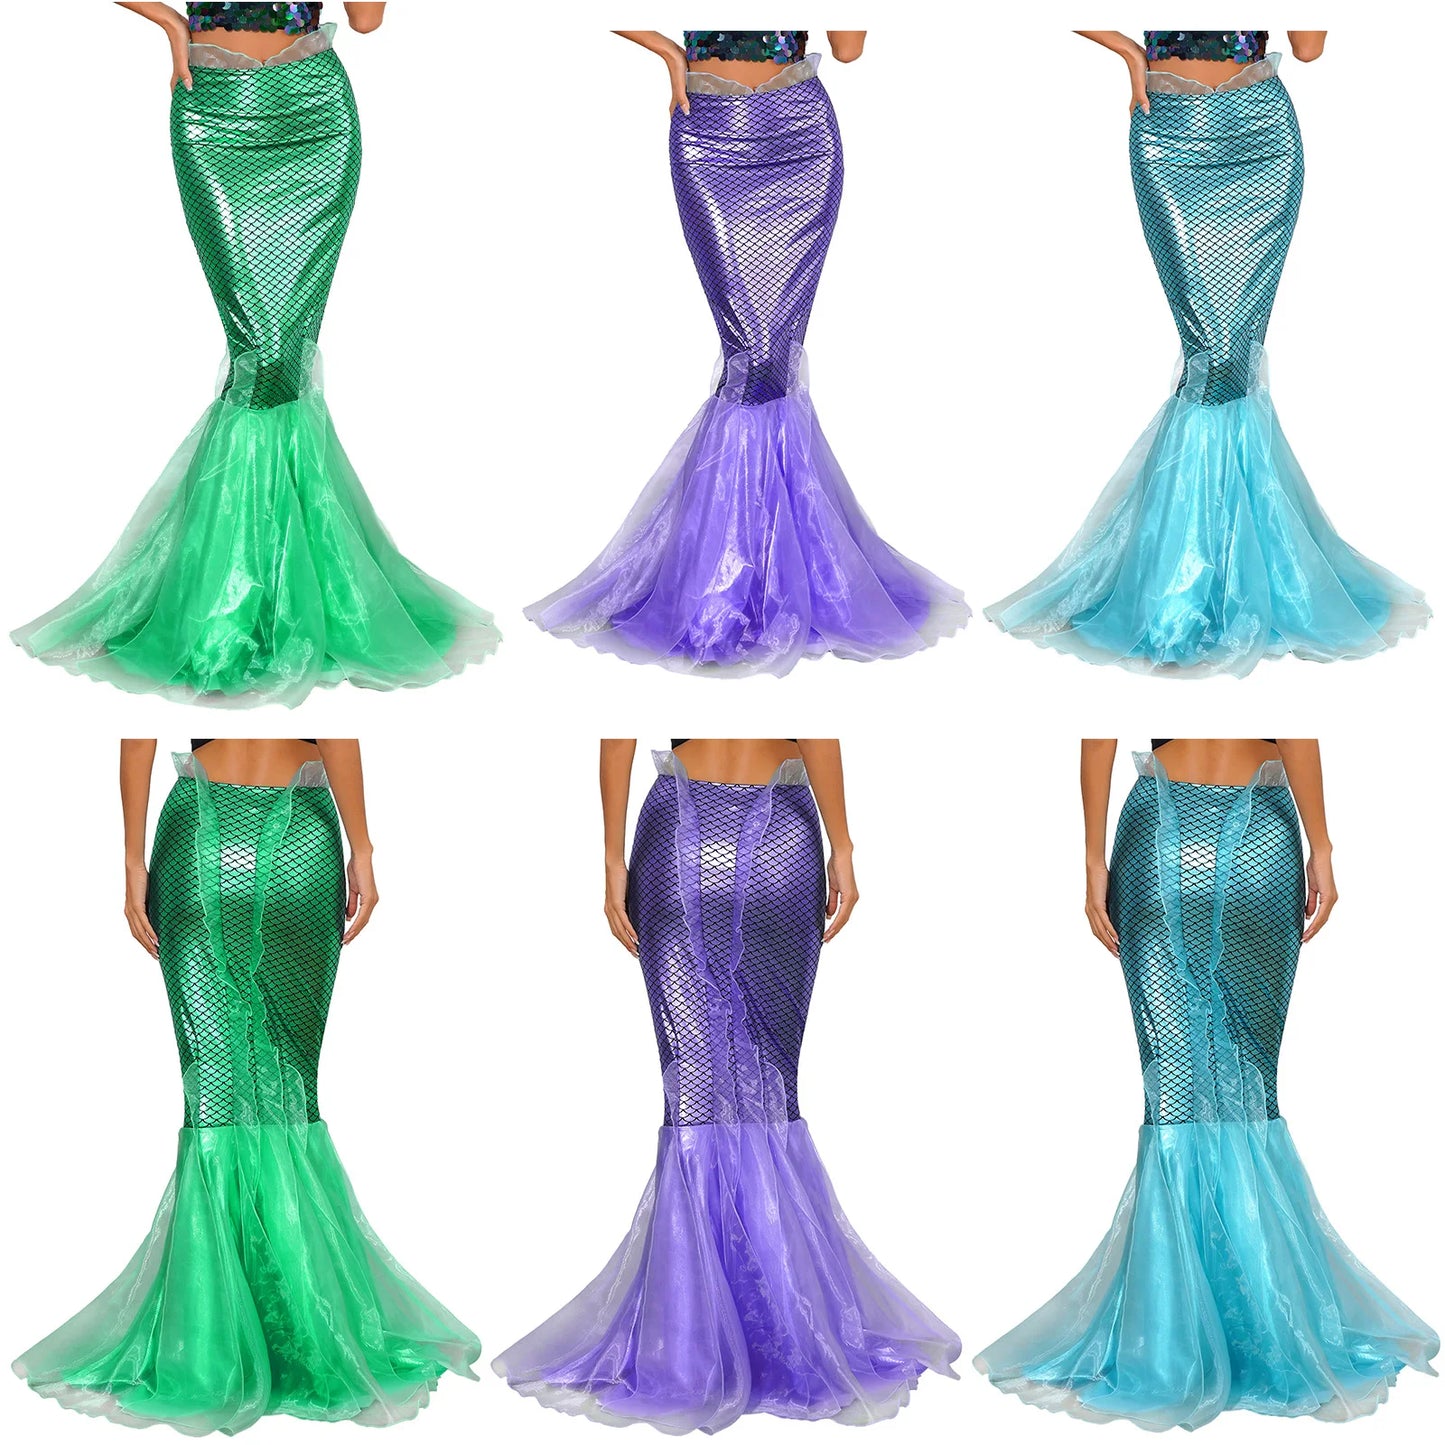 Womens Halloween Mermaid Maxi Skirt Cascading Tulle Fish Scale Print Shiny Fishtail Skirt Princess Cosplay Party Fancy Dress-Up